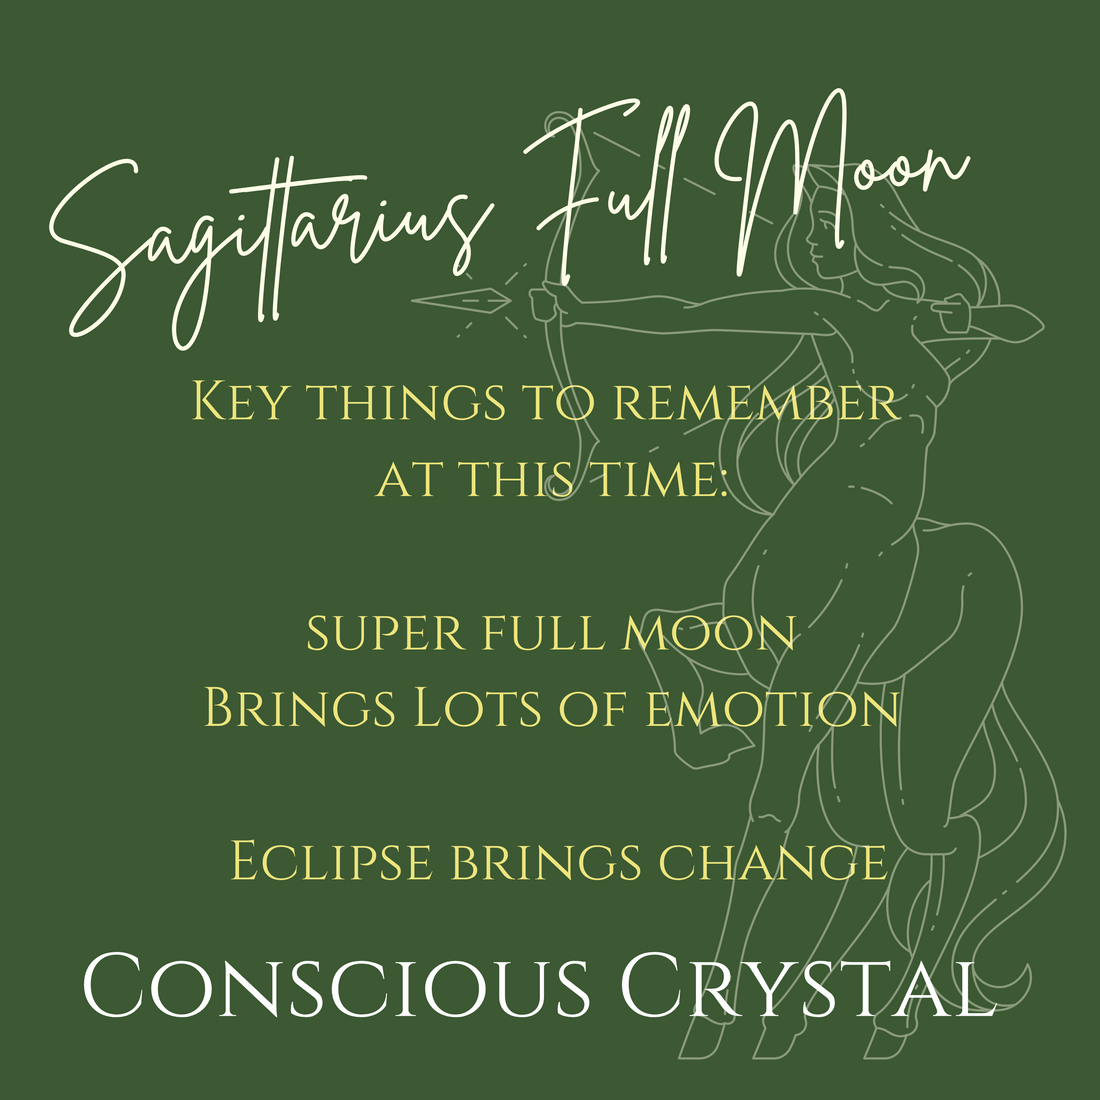 Sagittarius Full moon, Remember Super Full Moons Bring Lots Of Emotions and Eclipse Bring Change